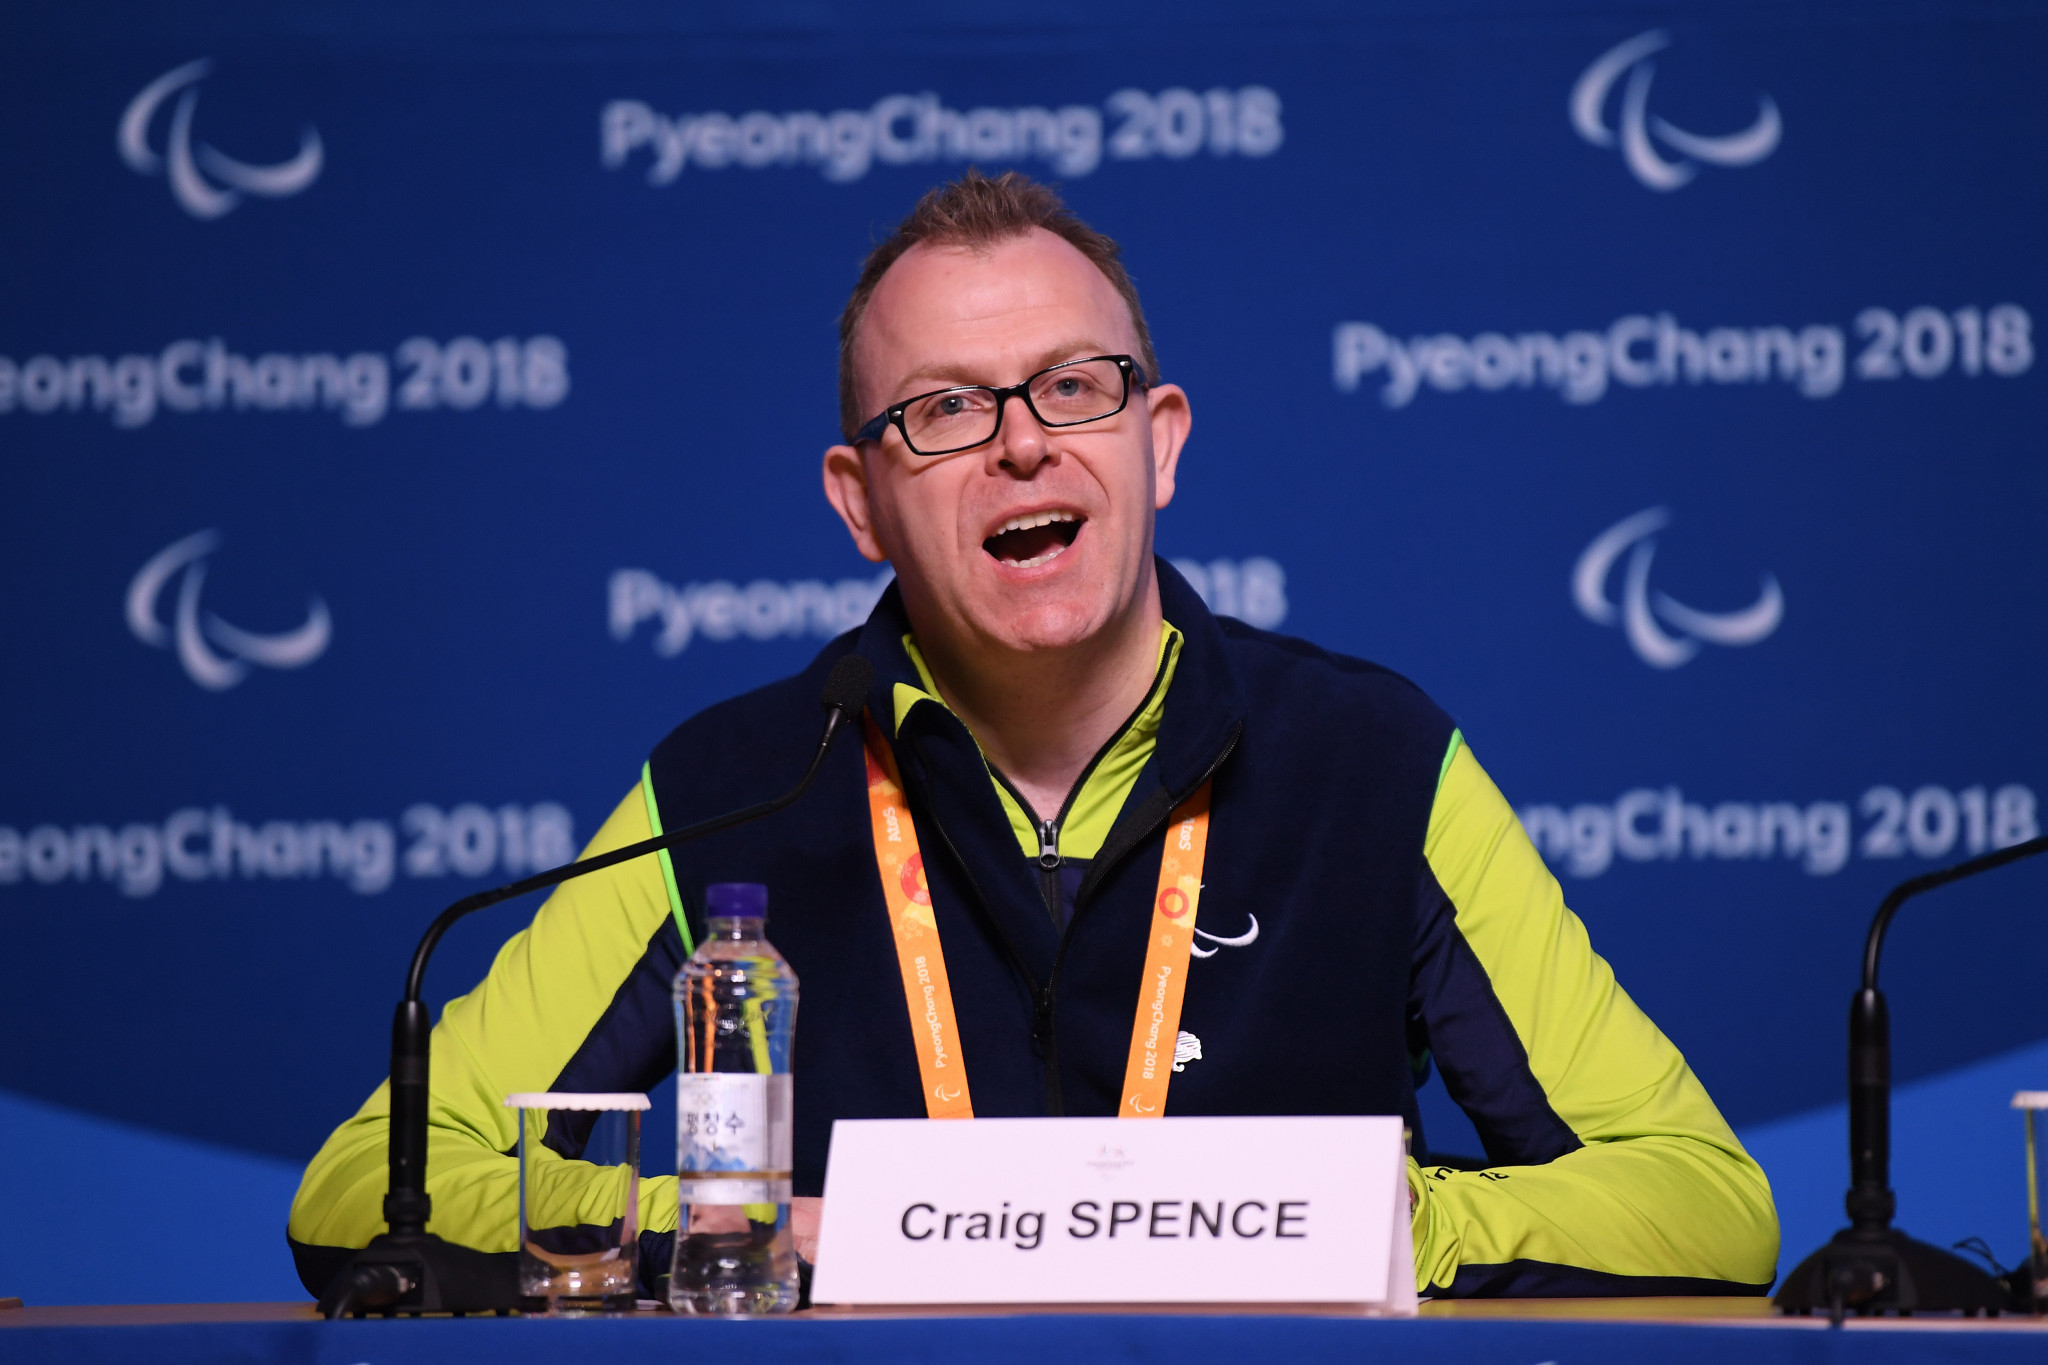 IPC undergo management reshuffle and make new legal and anti-doping appointments